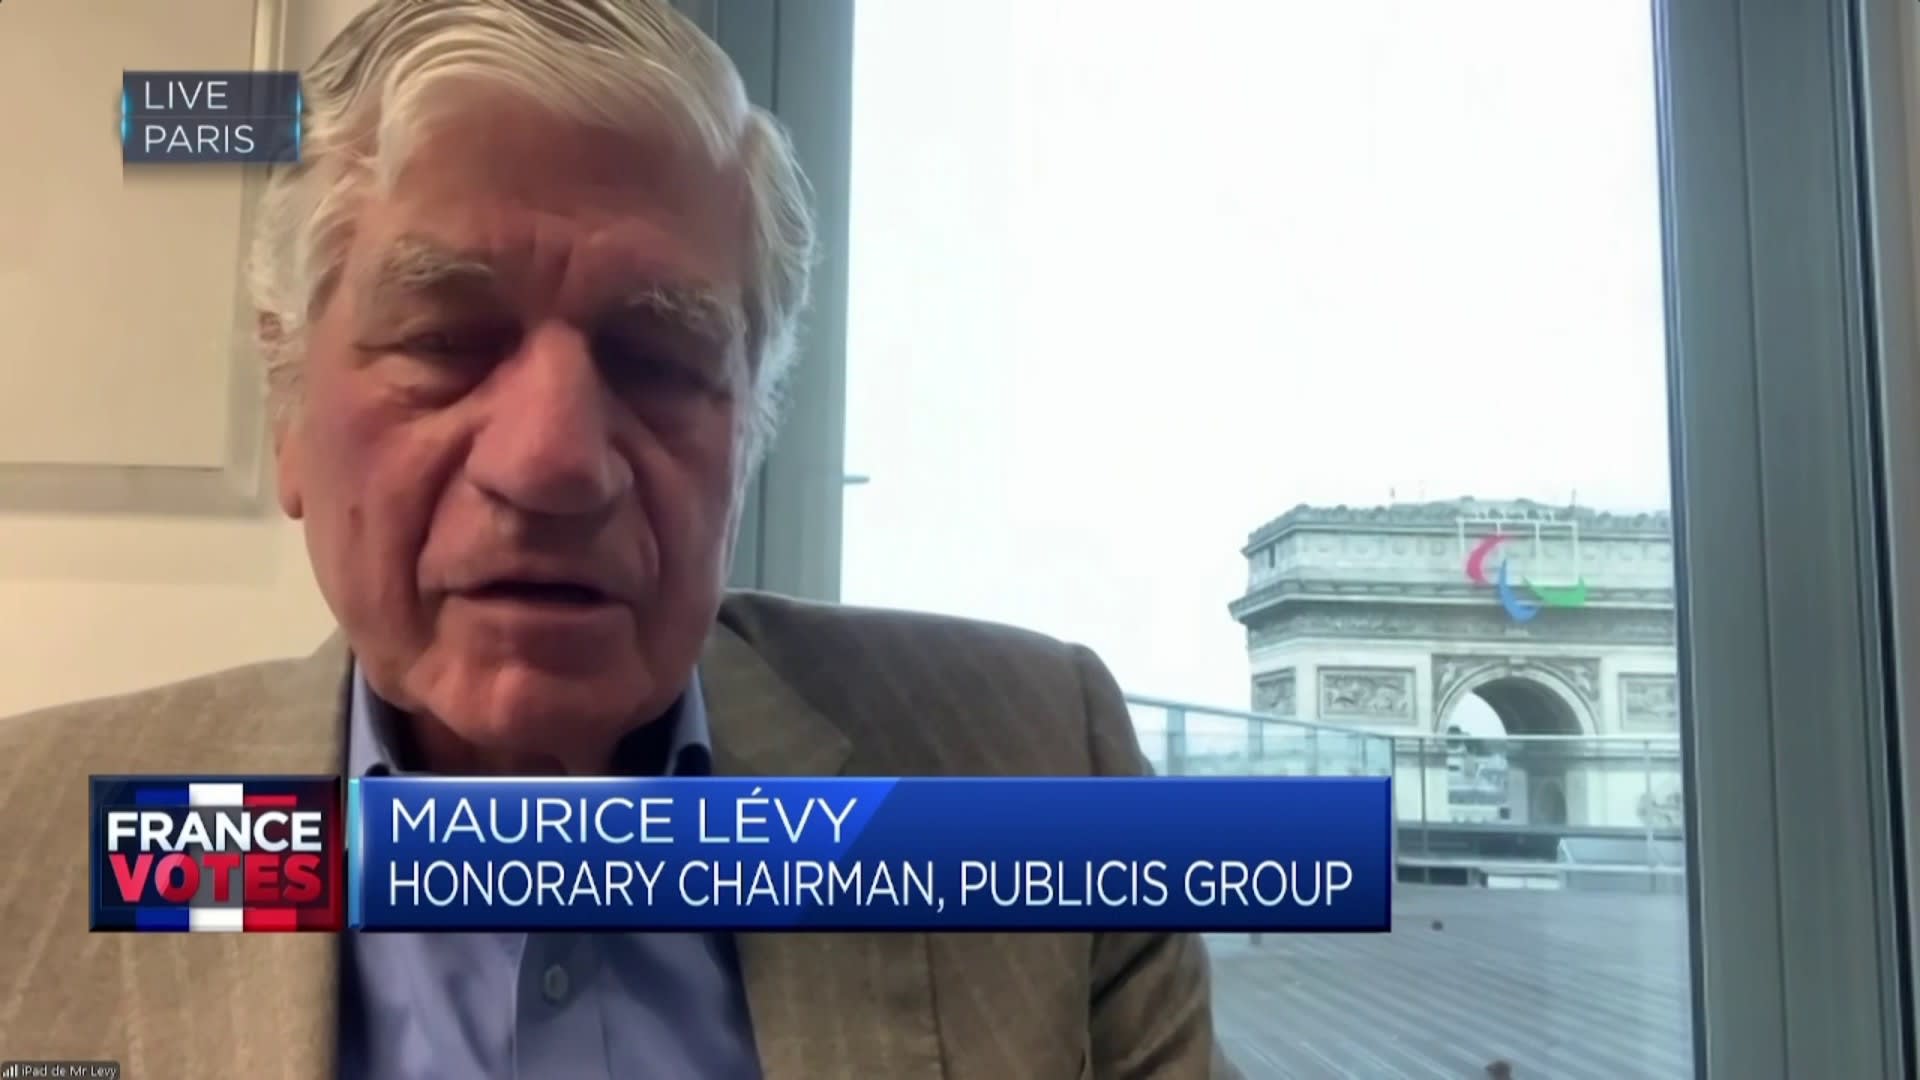 French hung parliament is 'best outcome' in election scenario, Publicis chairman Maurice Lévy says